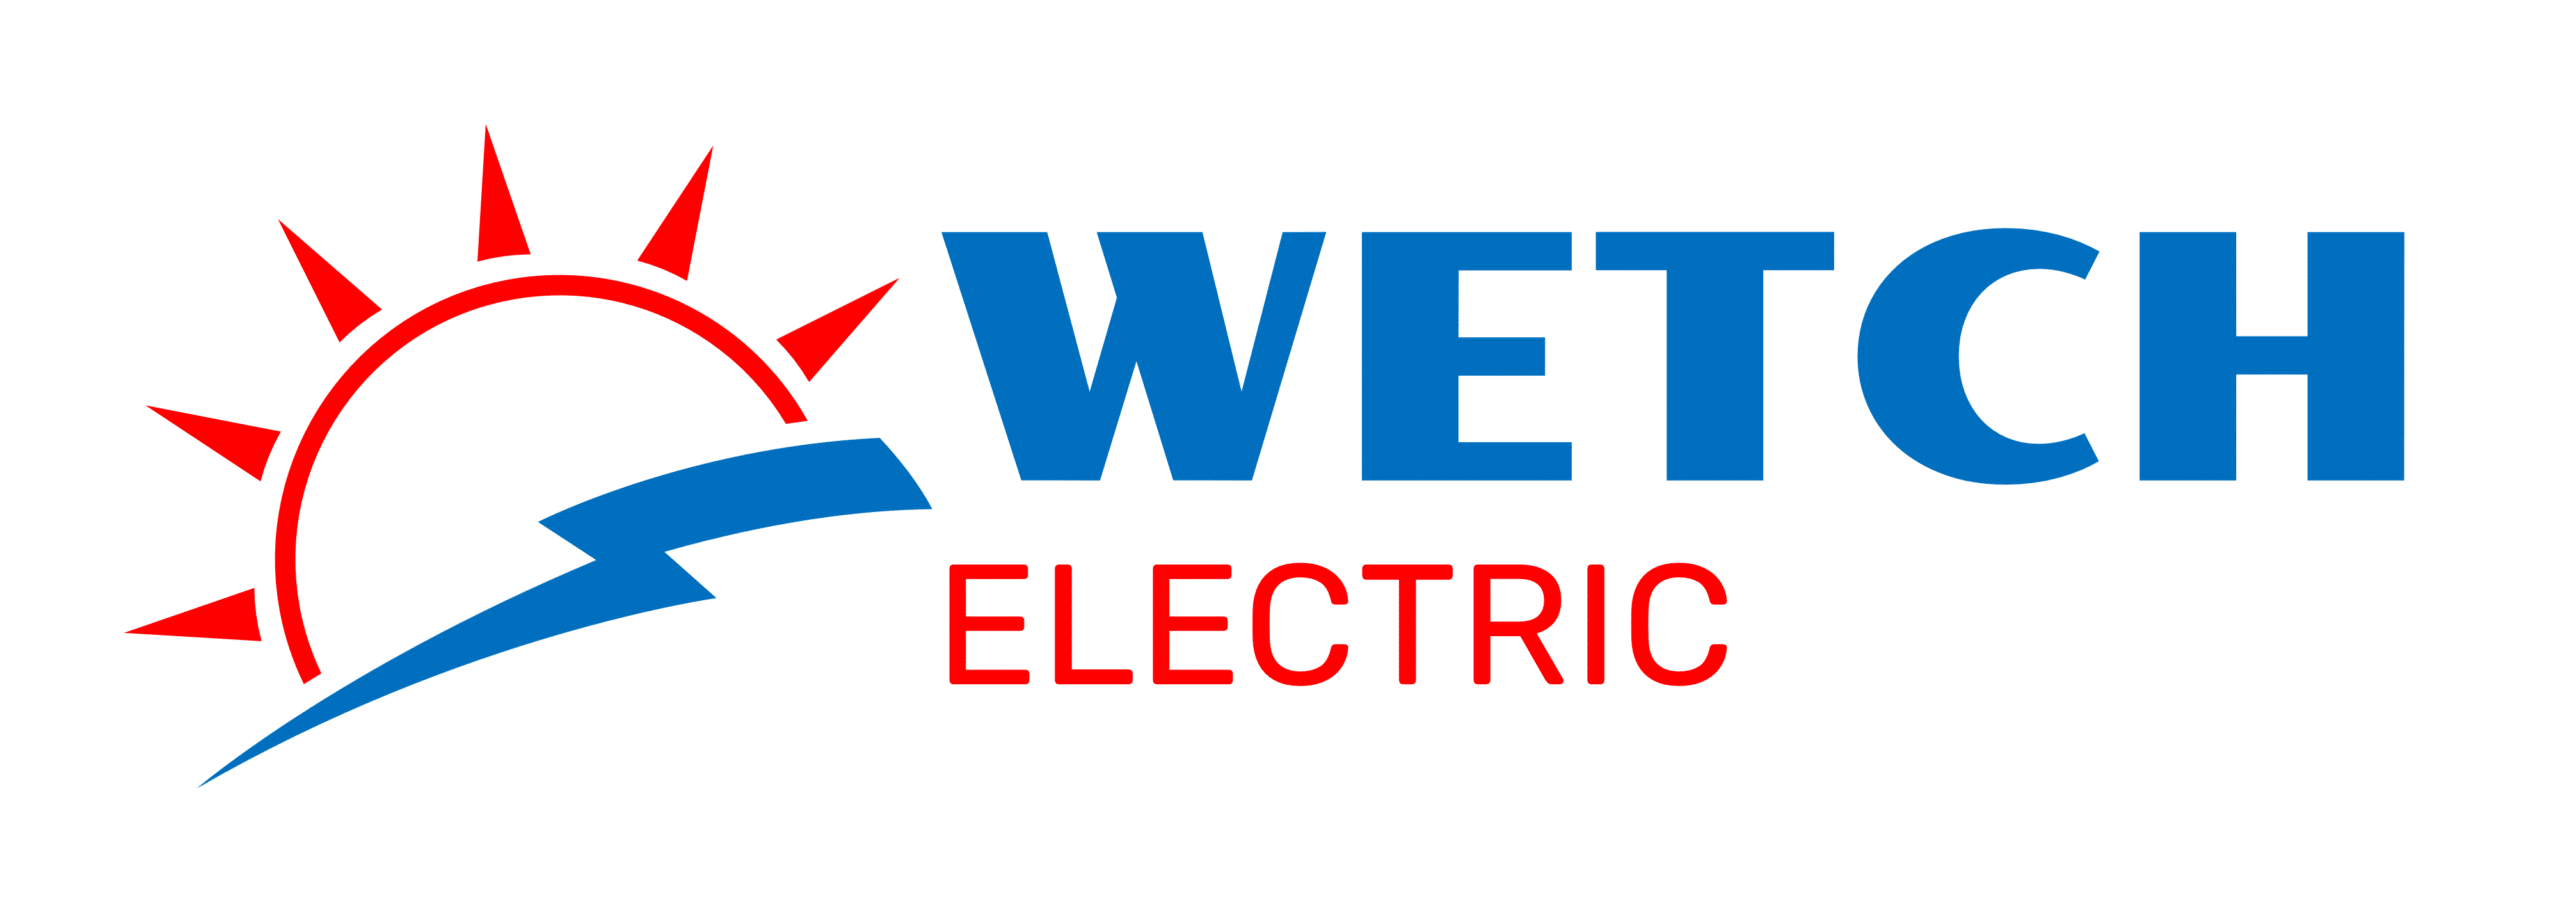 Logo of wetch electric featuring red and blue text with a stylized red sun and blue swoosh design above the text.